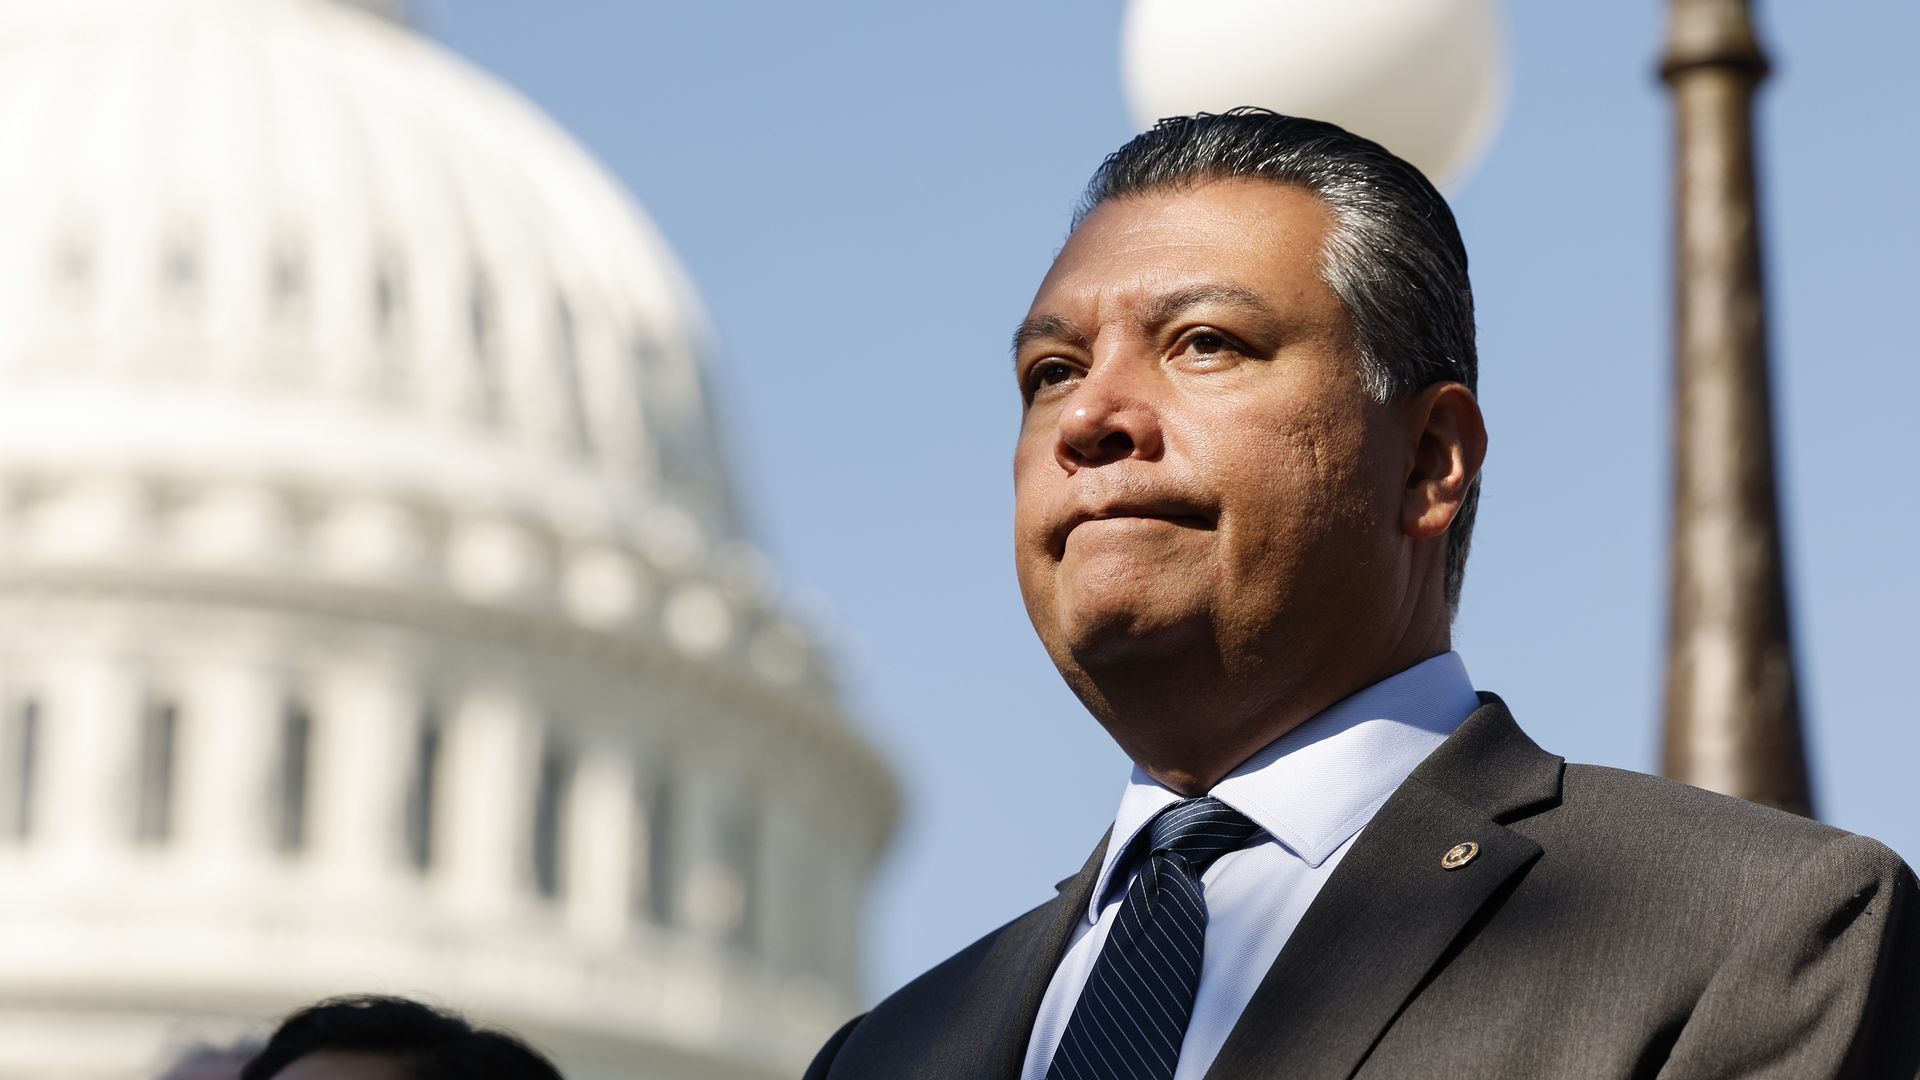 California Senator Alex Padilla stands in front of the U.S. Capitol with a blue sky behind him